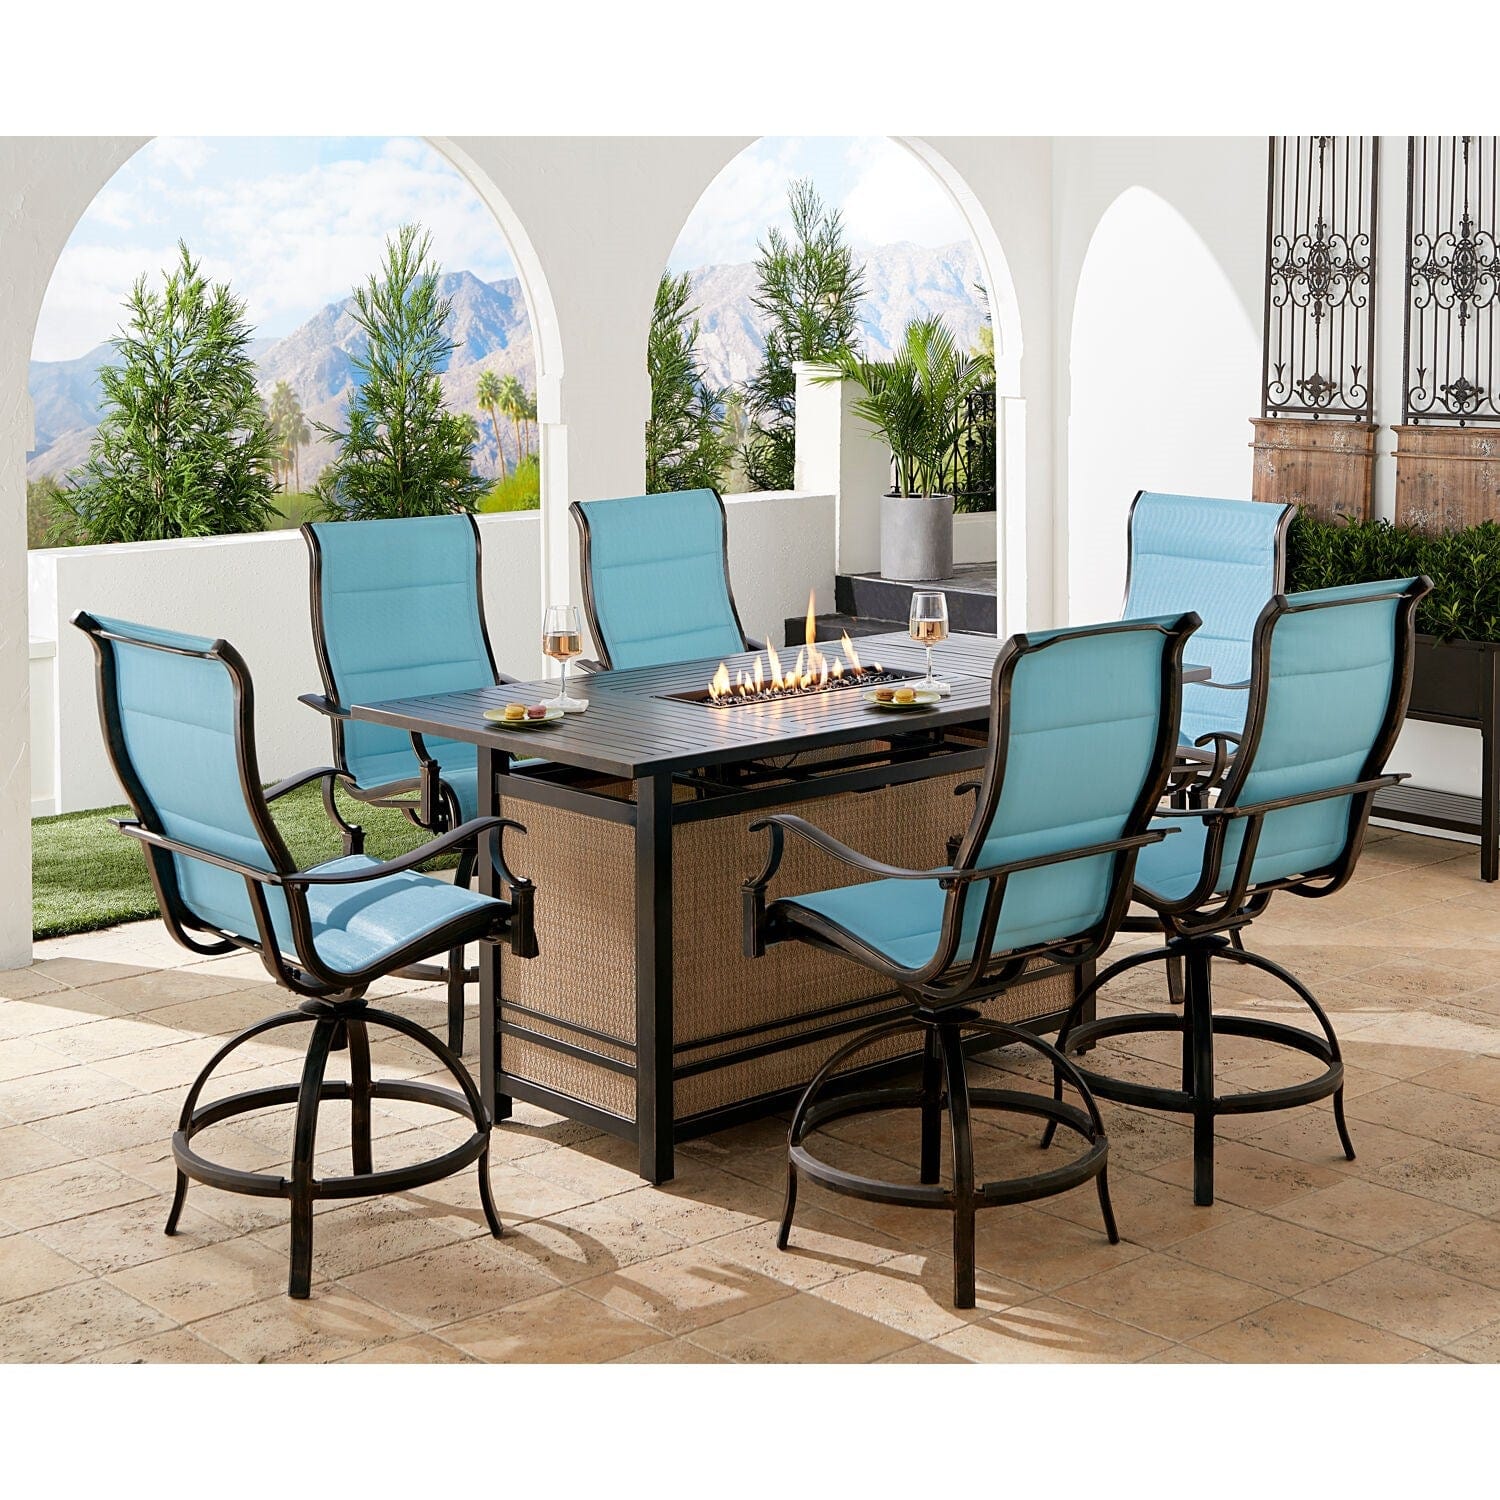 Hanover Fire Pit Dining Set Hanover Traditions 7-Piece High-Dining Set in Blue with 6 Padded Counter-Height Swivel Chairs and a 30,000 BTU Fire Pit Dining Table | TRAD7PCPFPDBR-BLU